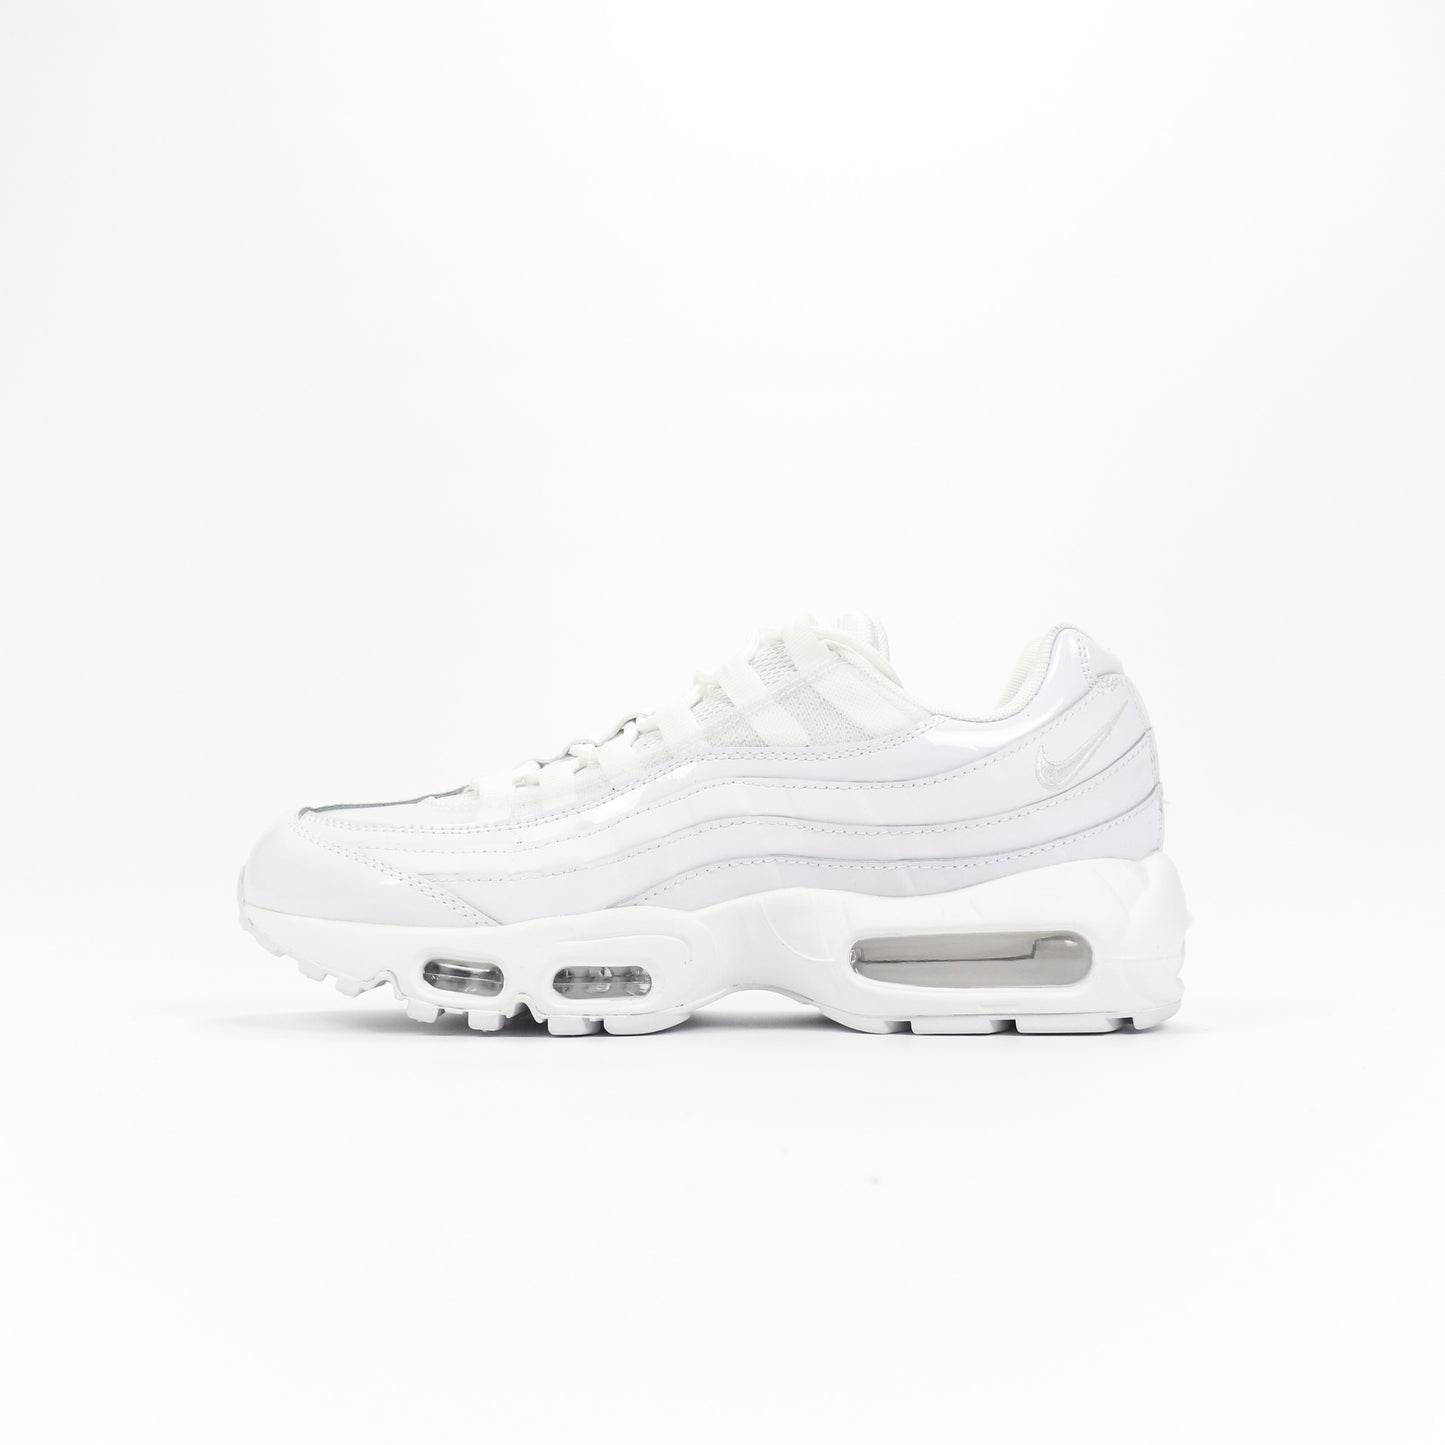 Air Max 95 - whatever on 